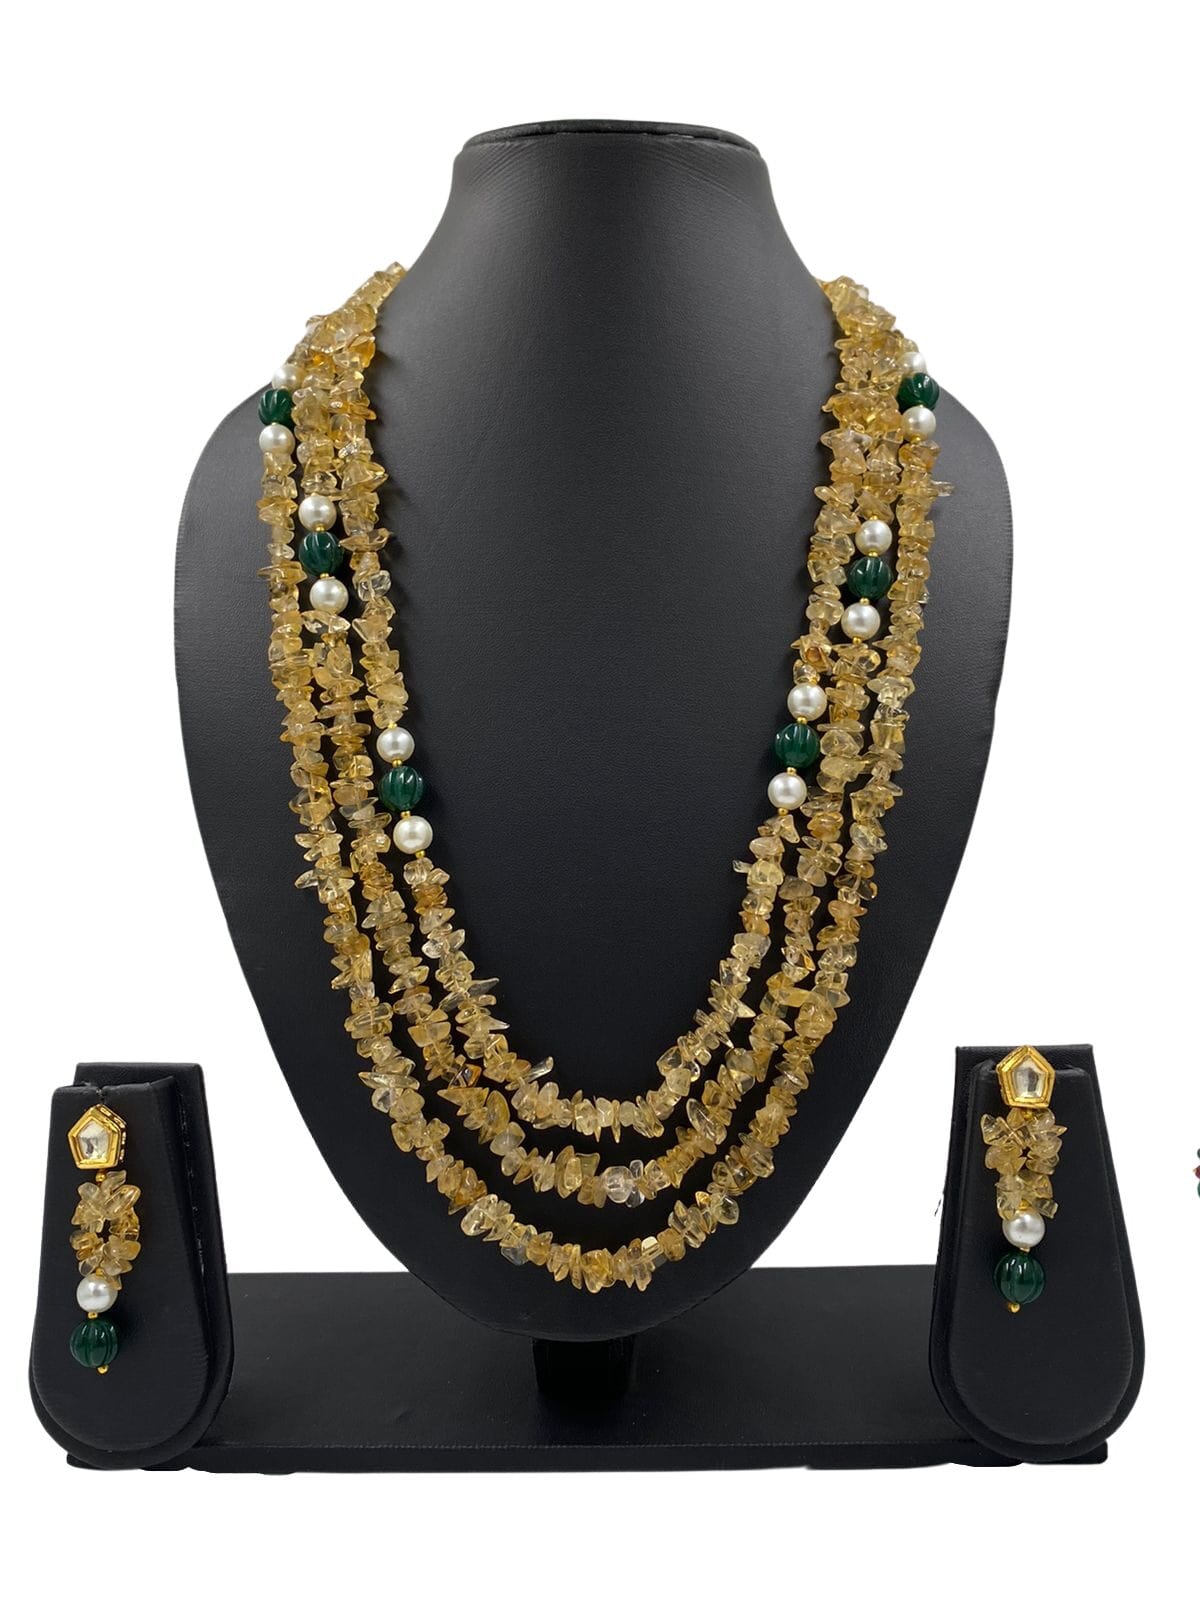 Handcrafted Semi Precious Yellow Citrine Long Beads Necklace For Women By Gehna Shop Beads Jewellery